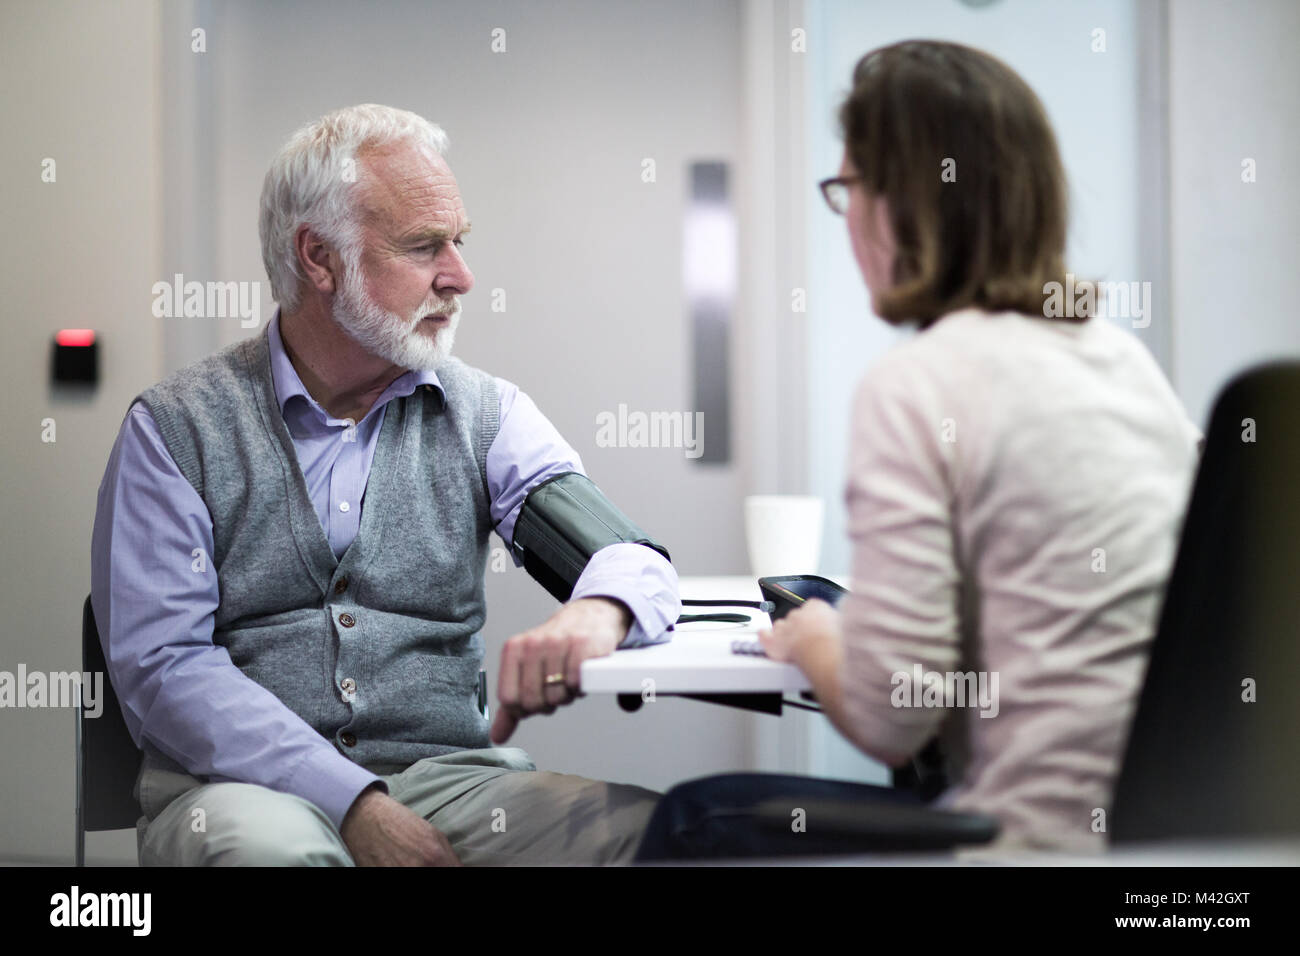 Female Medical Doctor taking a Senior patients blood pressure Stock Photo